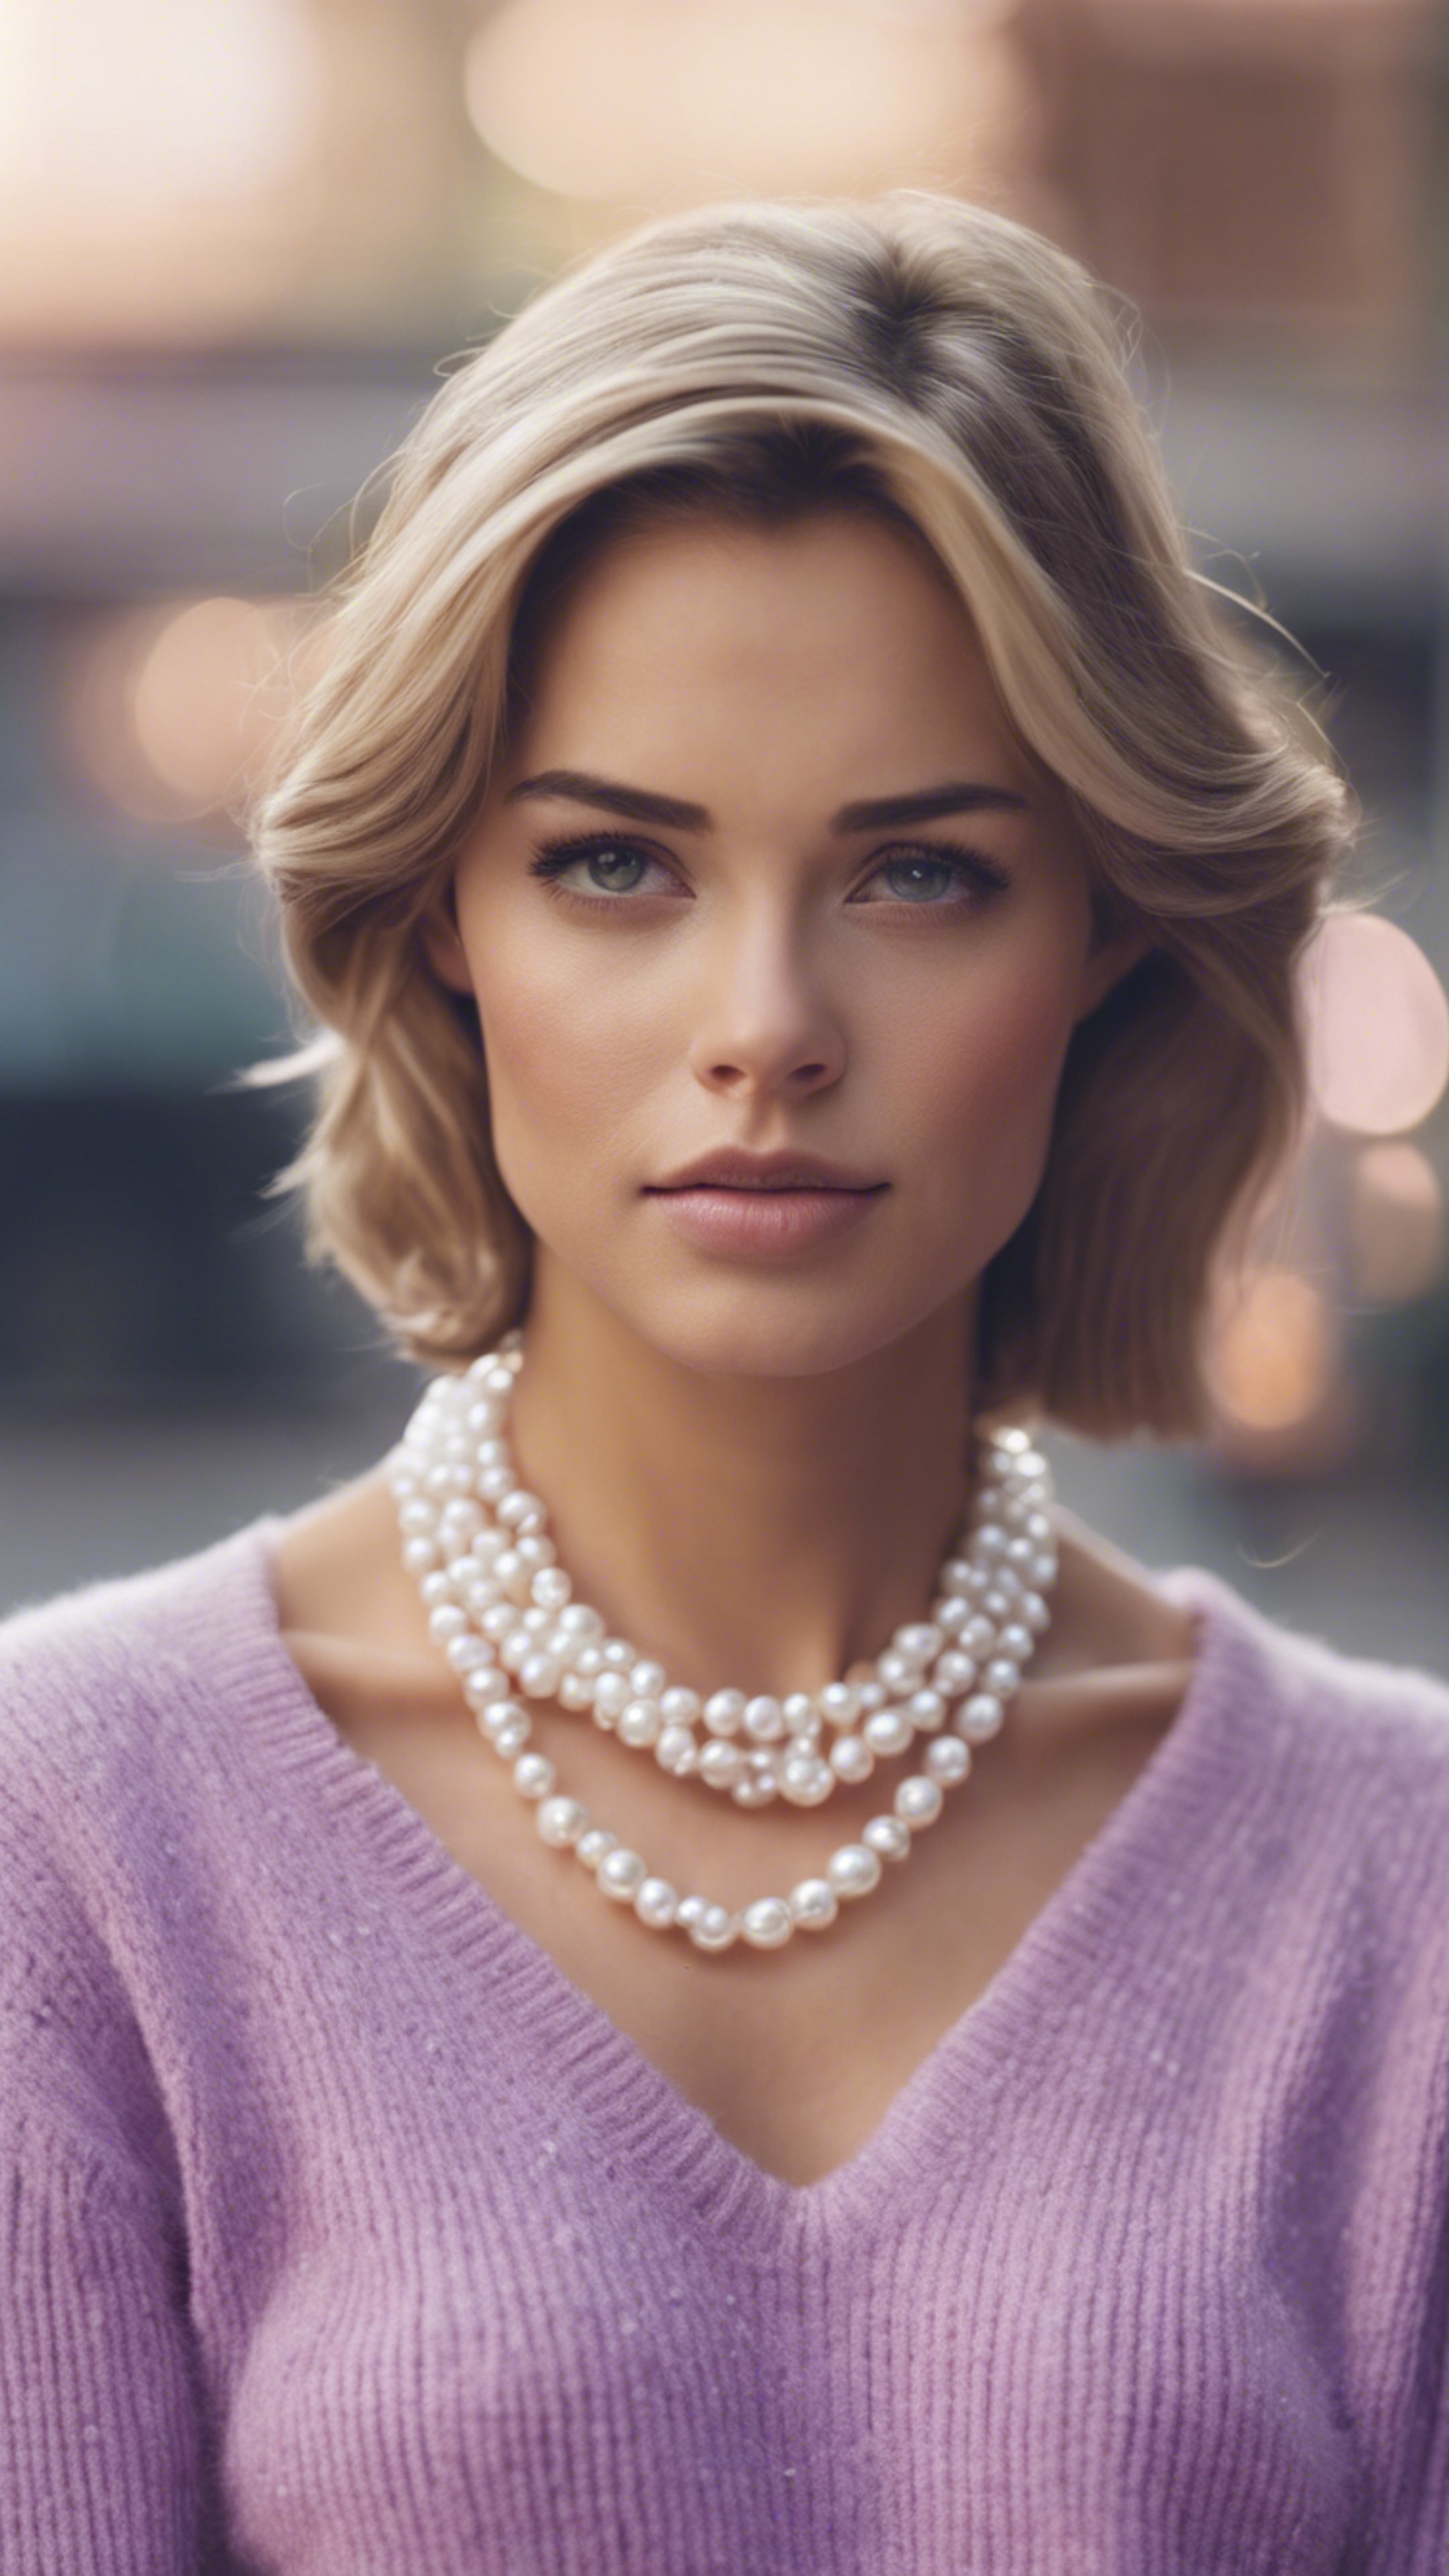 A stylish preppy woman wearing a pastel purple cashmere sweater and pearl necklace. Tapeta[eff5c75e56ed424daf90]